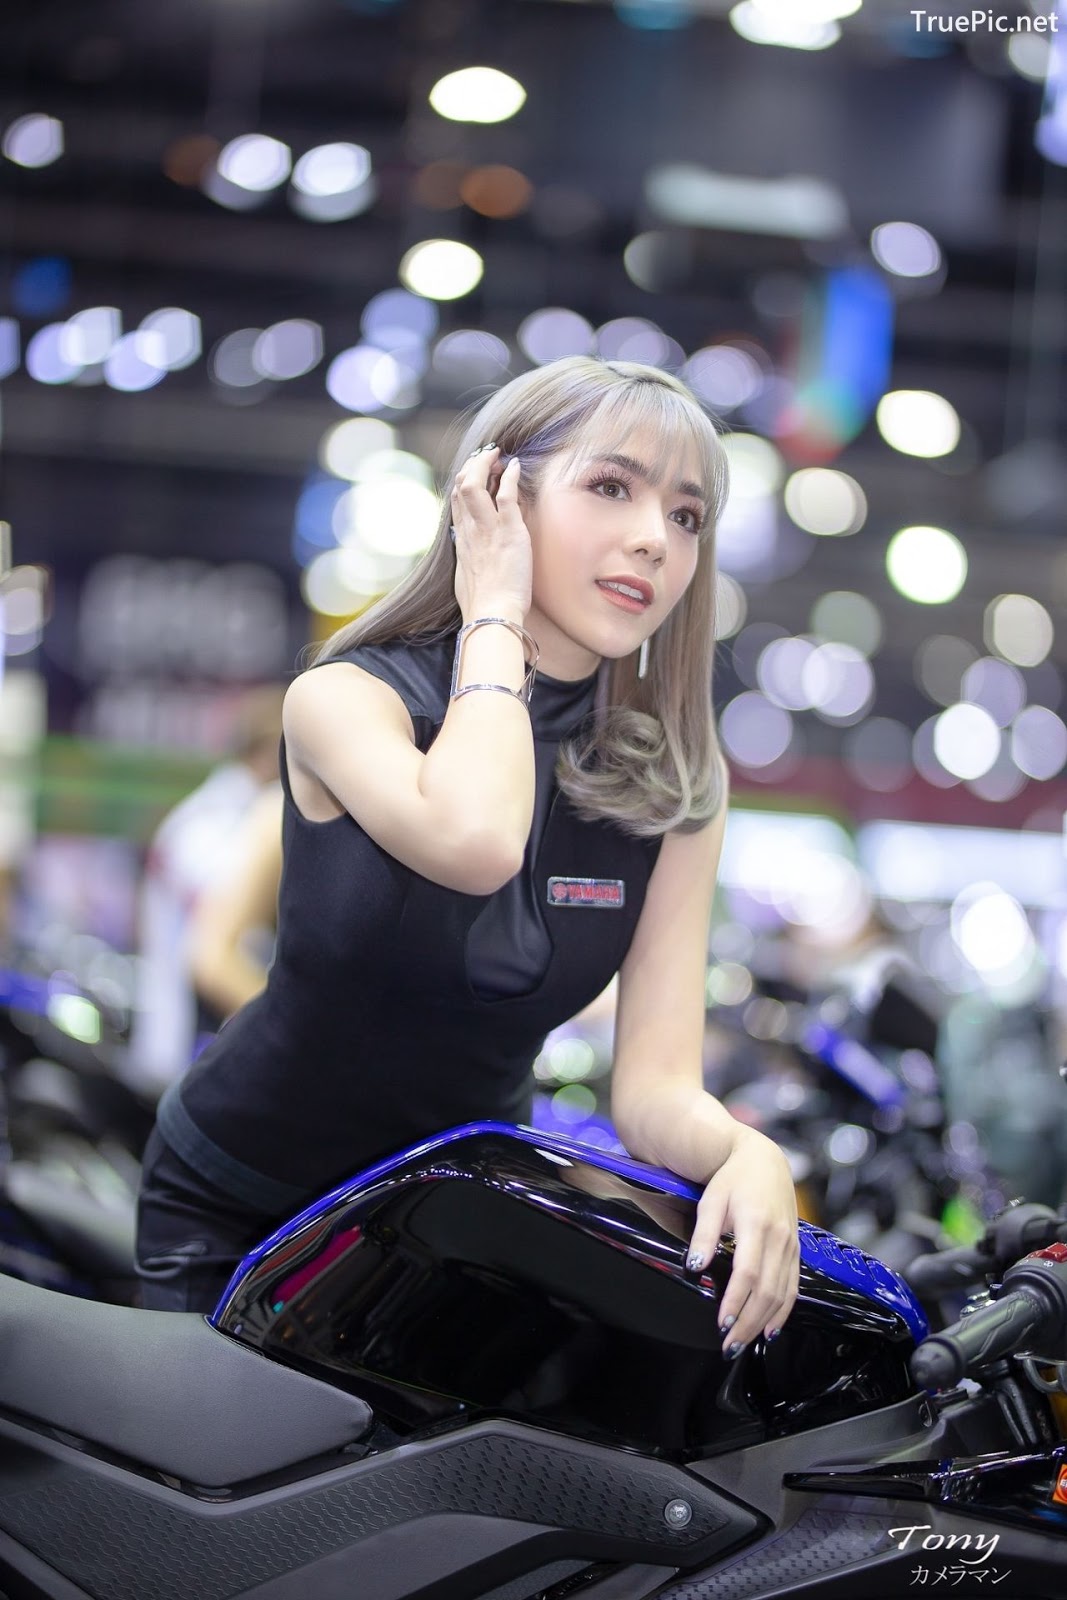 Image-Thailand-Hot-Model-Thai-Racing-Girl-At-Motor-Expo-2019-TruePic.net- Picture-121